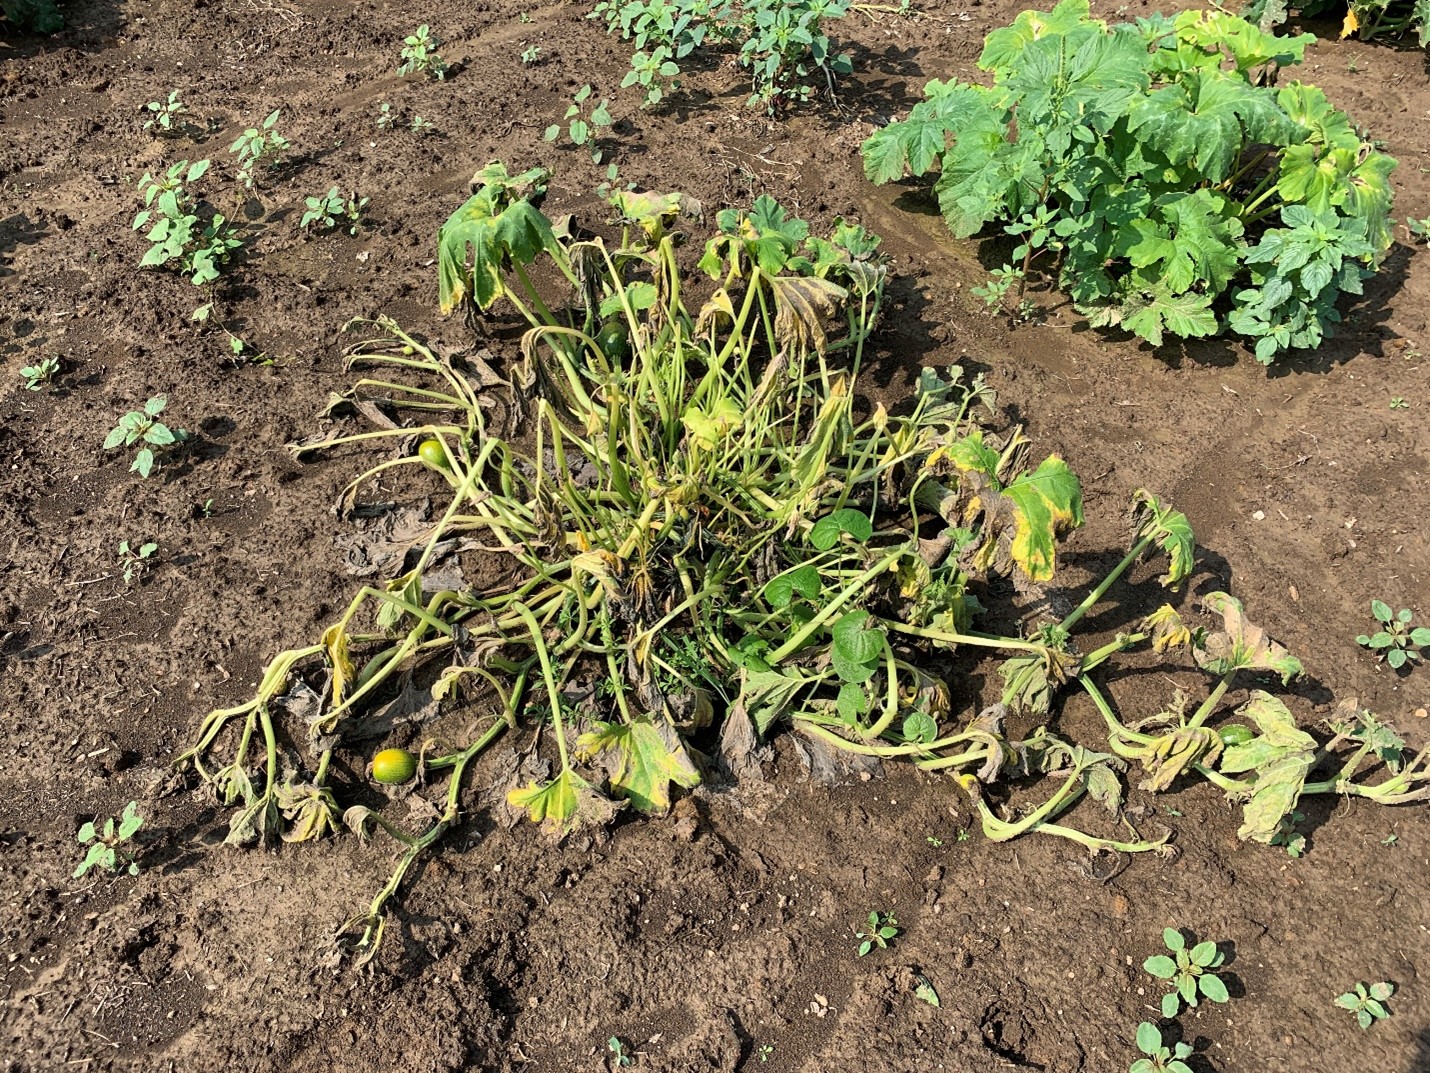 Wilting in cucurbit caused by squash vine borer larvae. Identification of squash vine borer damage can only be confirmed if bore holes or frass are observed on wilting plants. Photo by Aaron Cato.